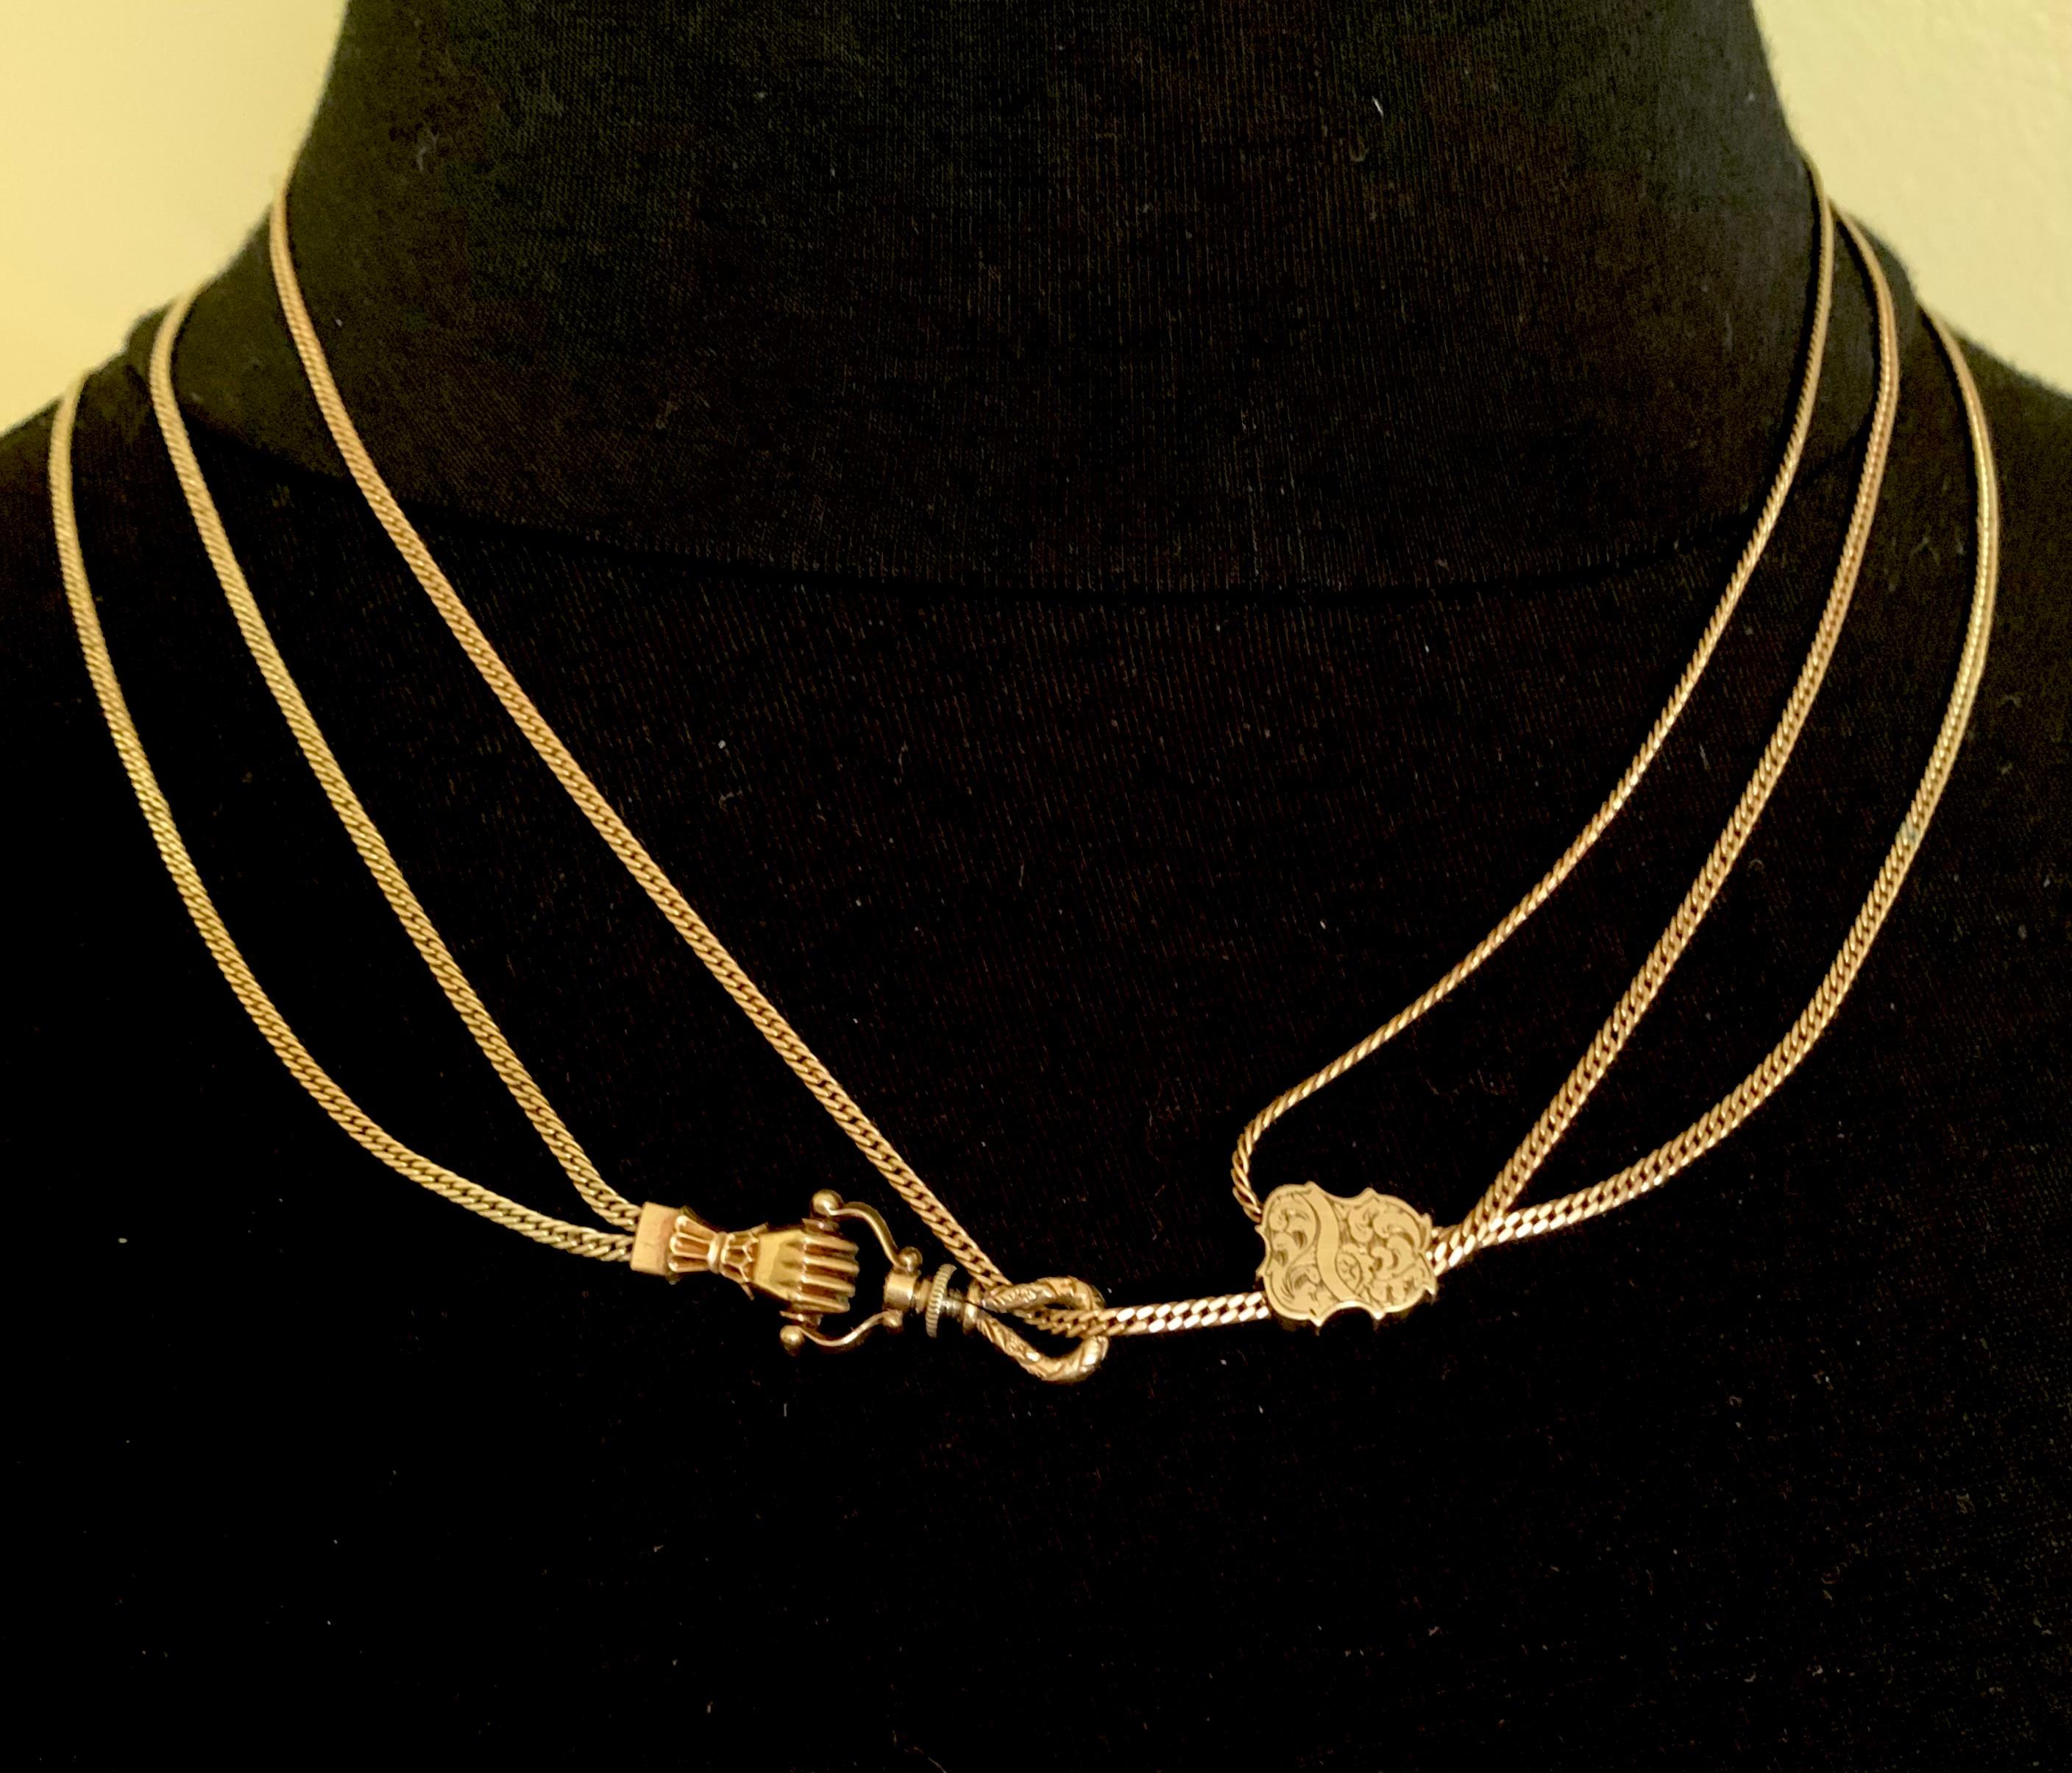 Victorian Exceptionally Long Antique 18K Gold Mano Sautoir Slide Chain Necklace Circa 1840 For Sale